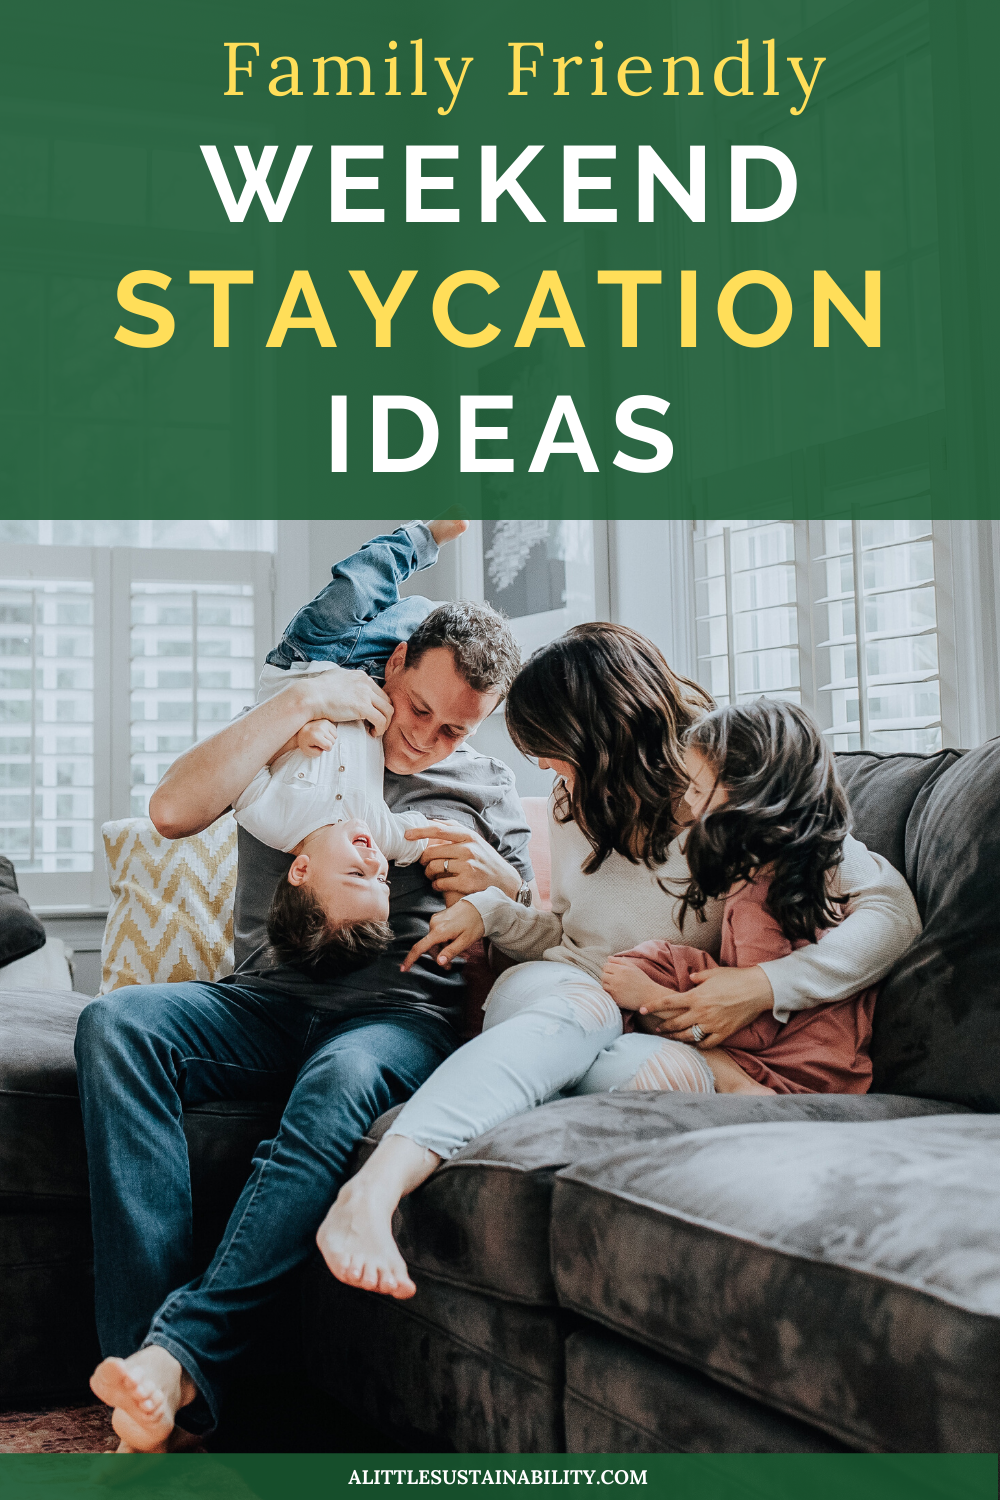 Whatever your reason for deciding on a weekend staycation, we've got you covered with some great ideas that'll help you make the most out of your staycation. The 10 weekend staycation ideas outlined here will make you appreciate your city, connect with nature, have fun, relax, and help you add a little more sustainability into your life. #staycation